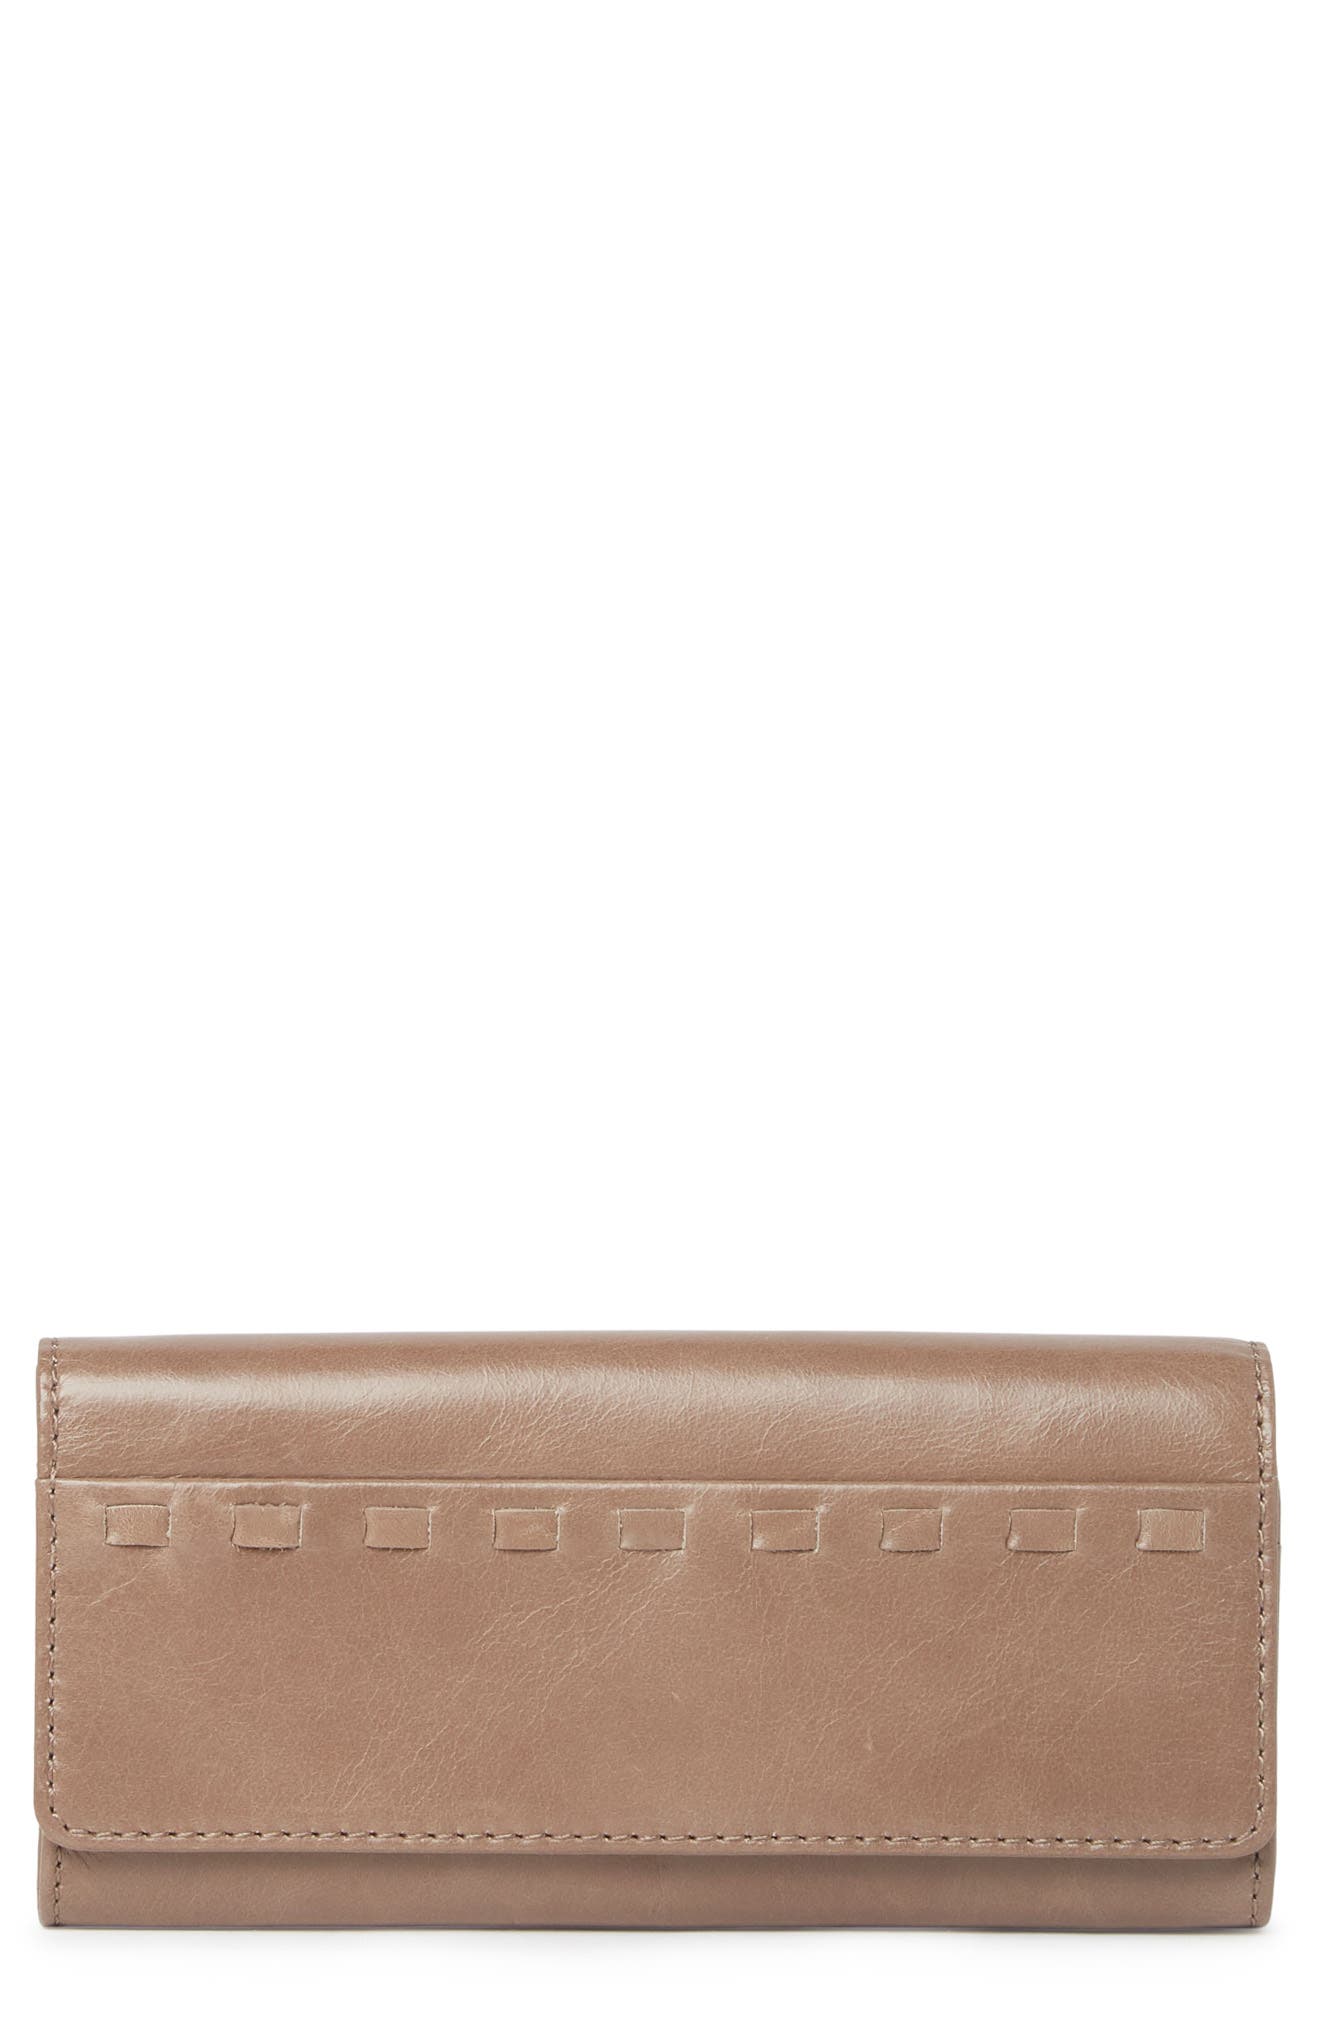 Hobo Rider Leather Wallet In Open Grey10